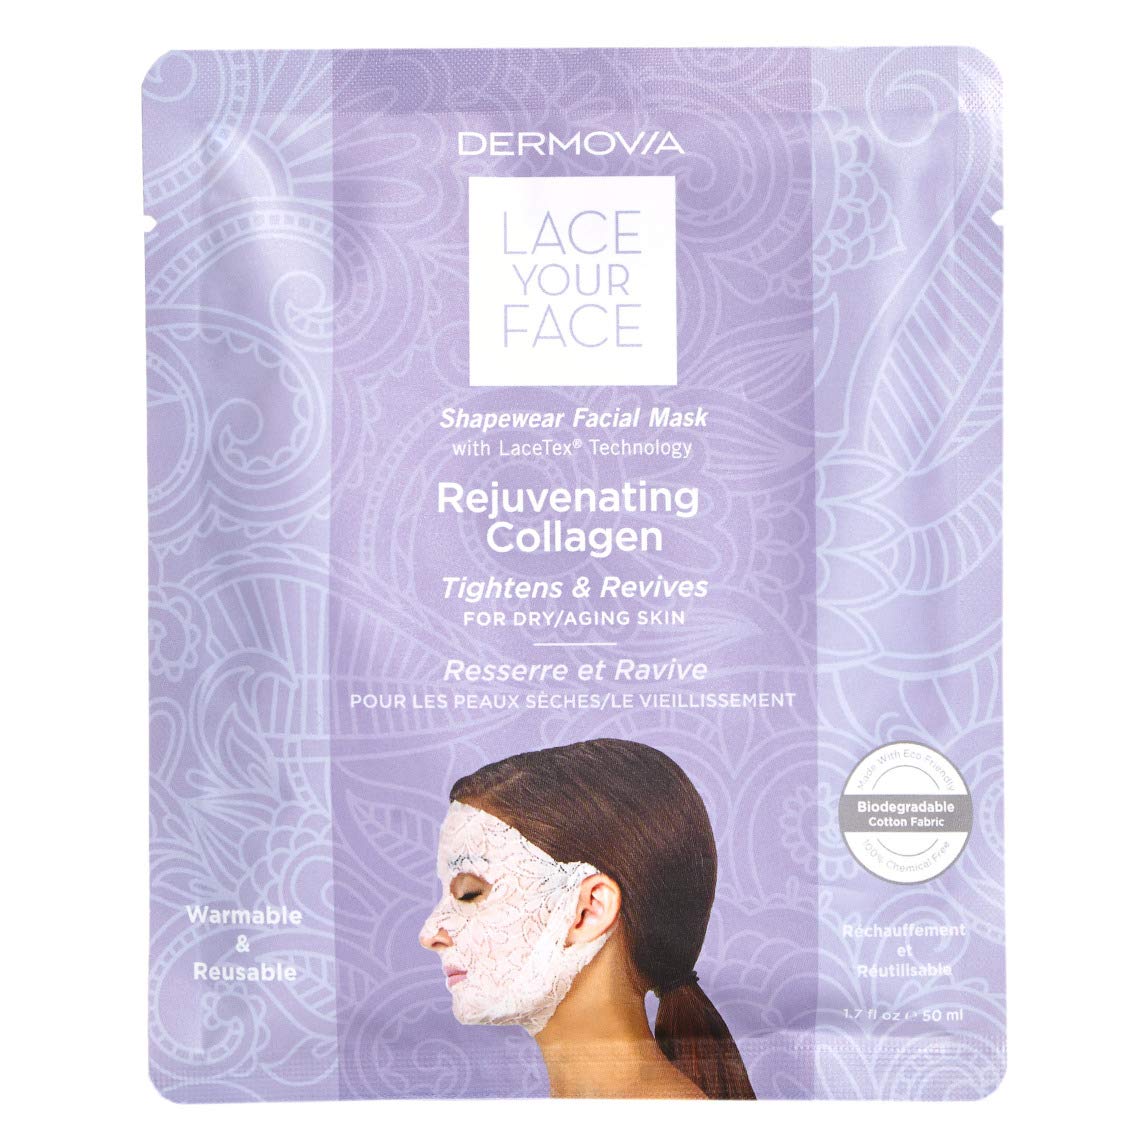 Lace Your Face: A Revolutionary New Beauty Product